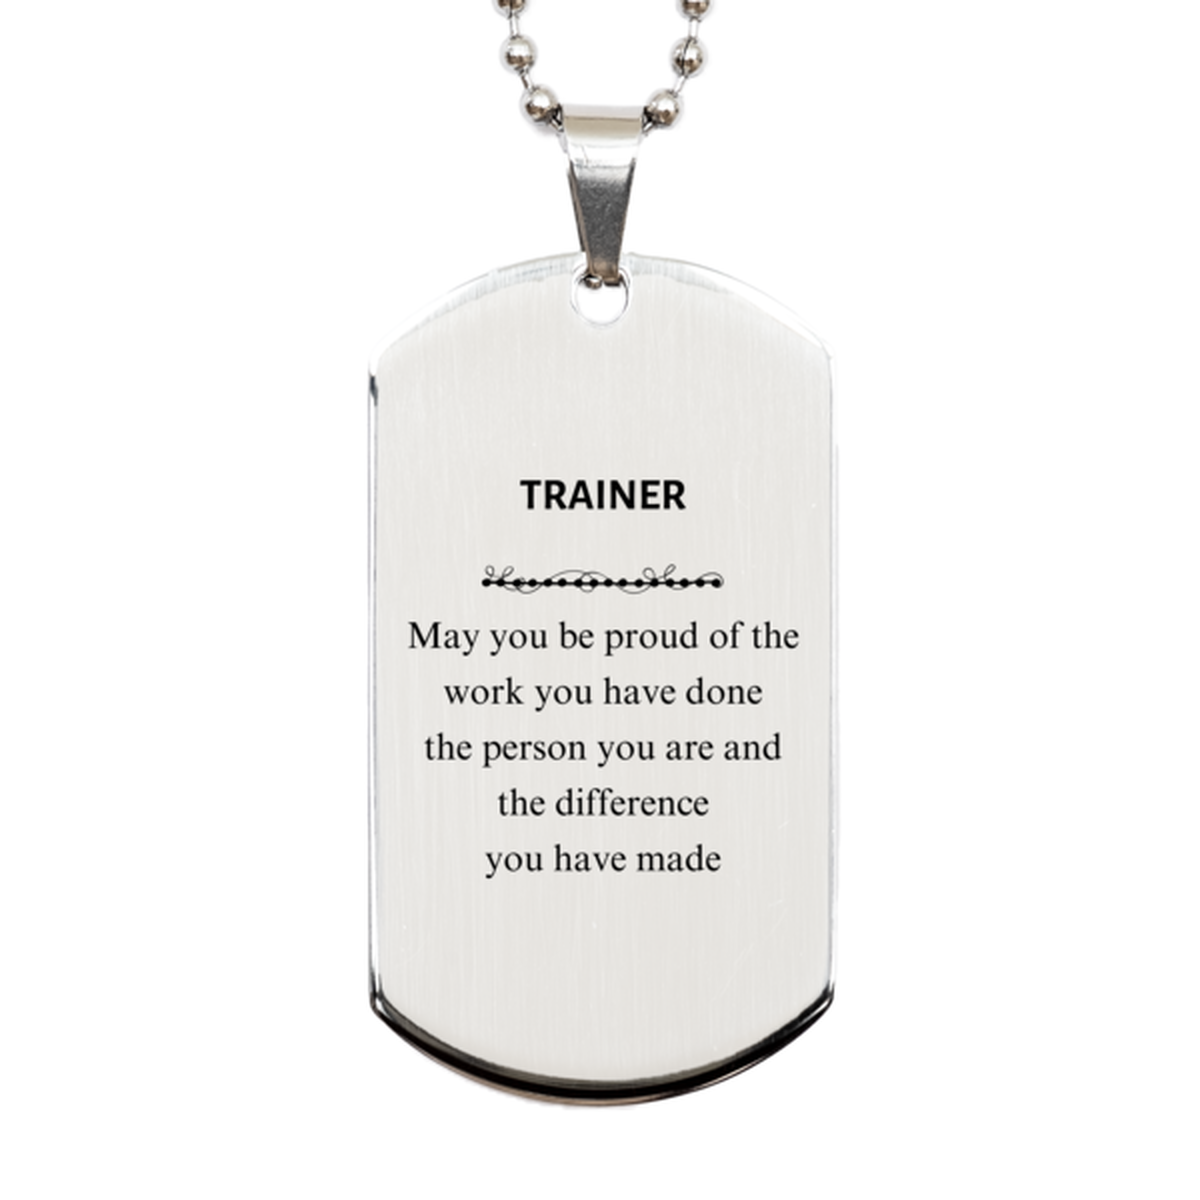 Trainer May you be proud of the work you have done, Retirement Trainer Silver Dog Tag for Colleague Appreciation Gifts Amazing for Trainer